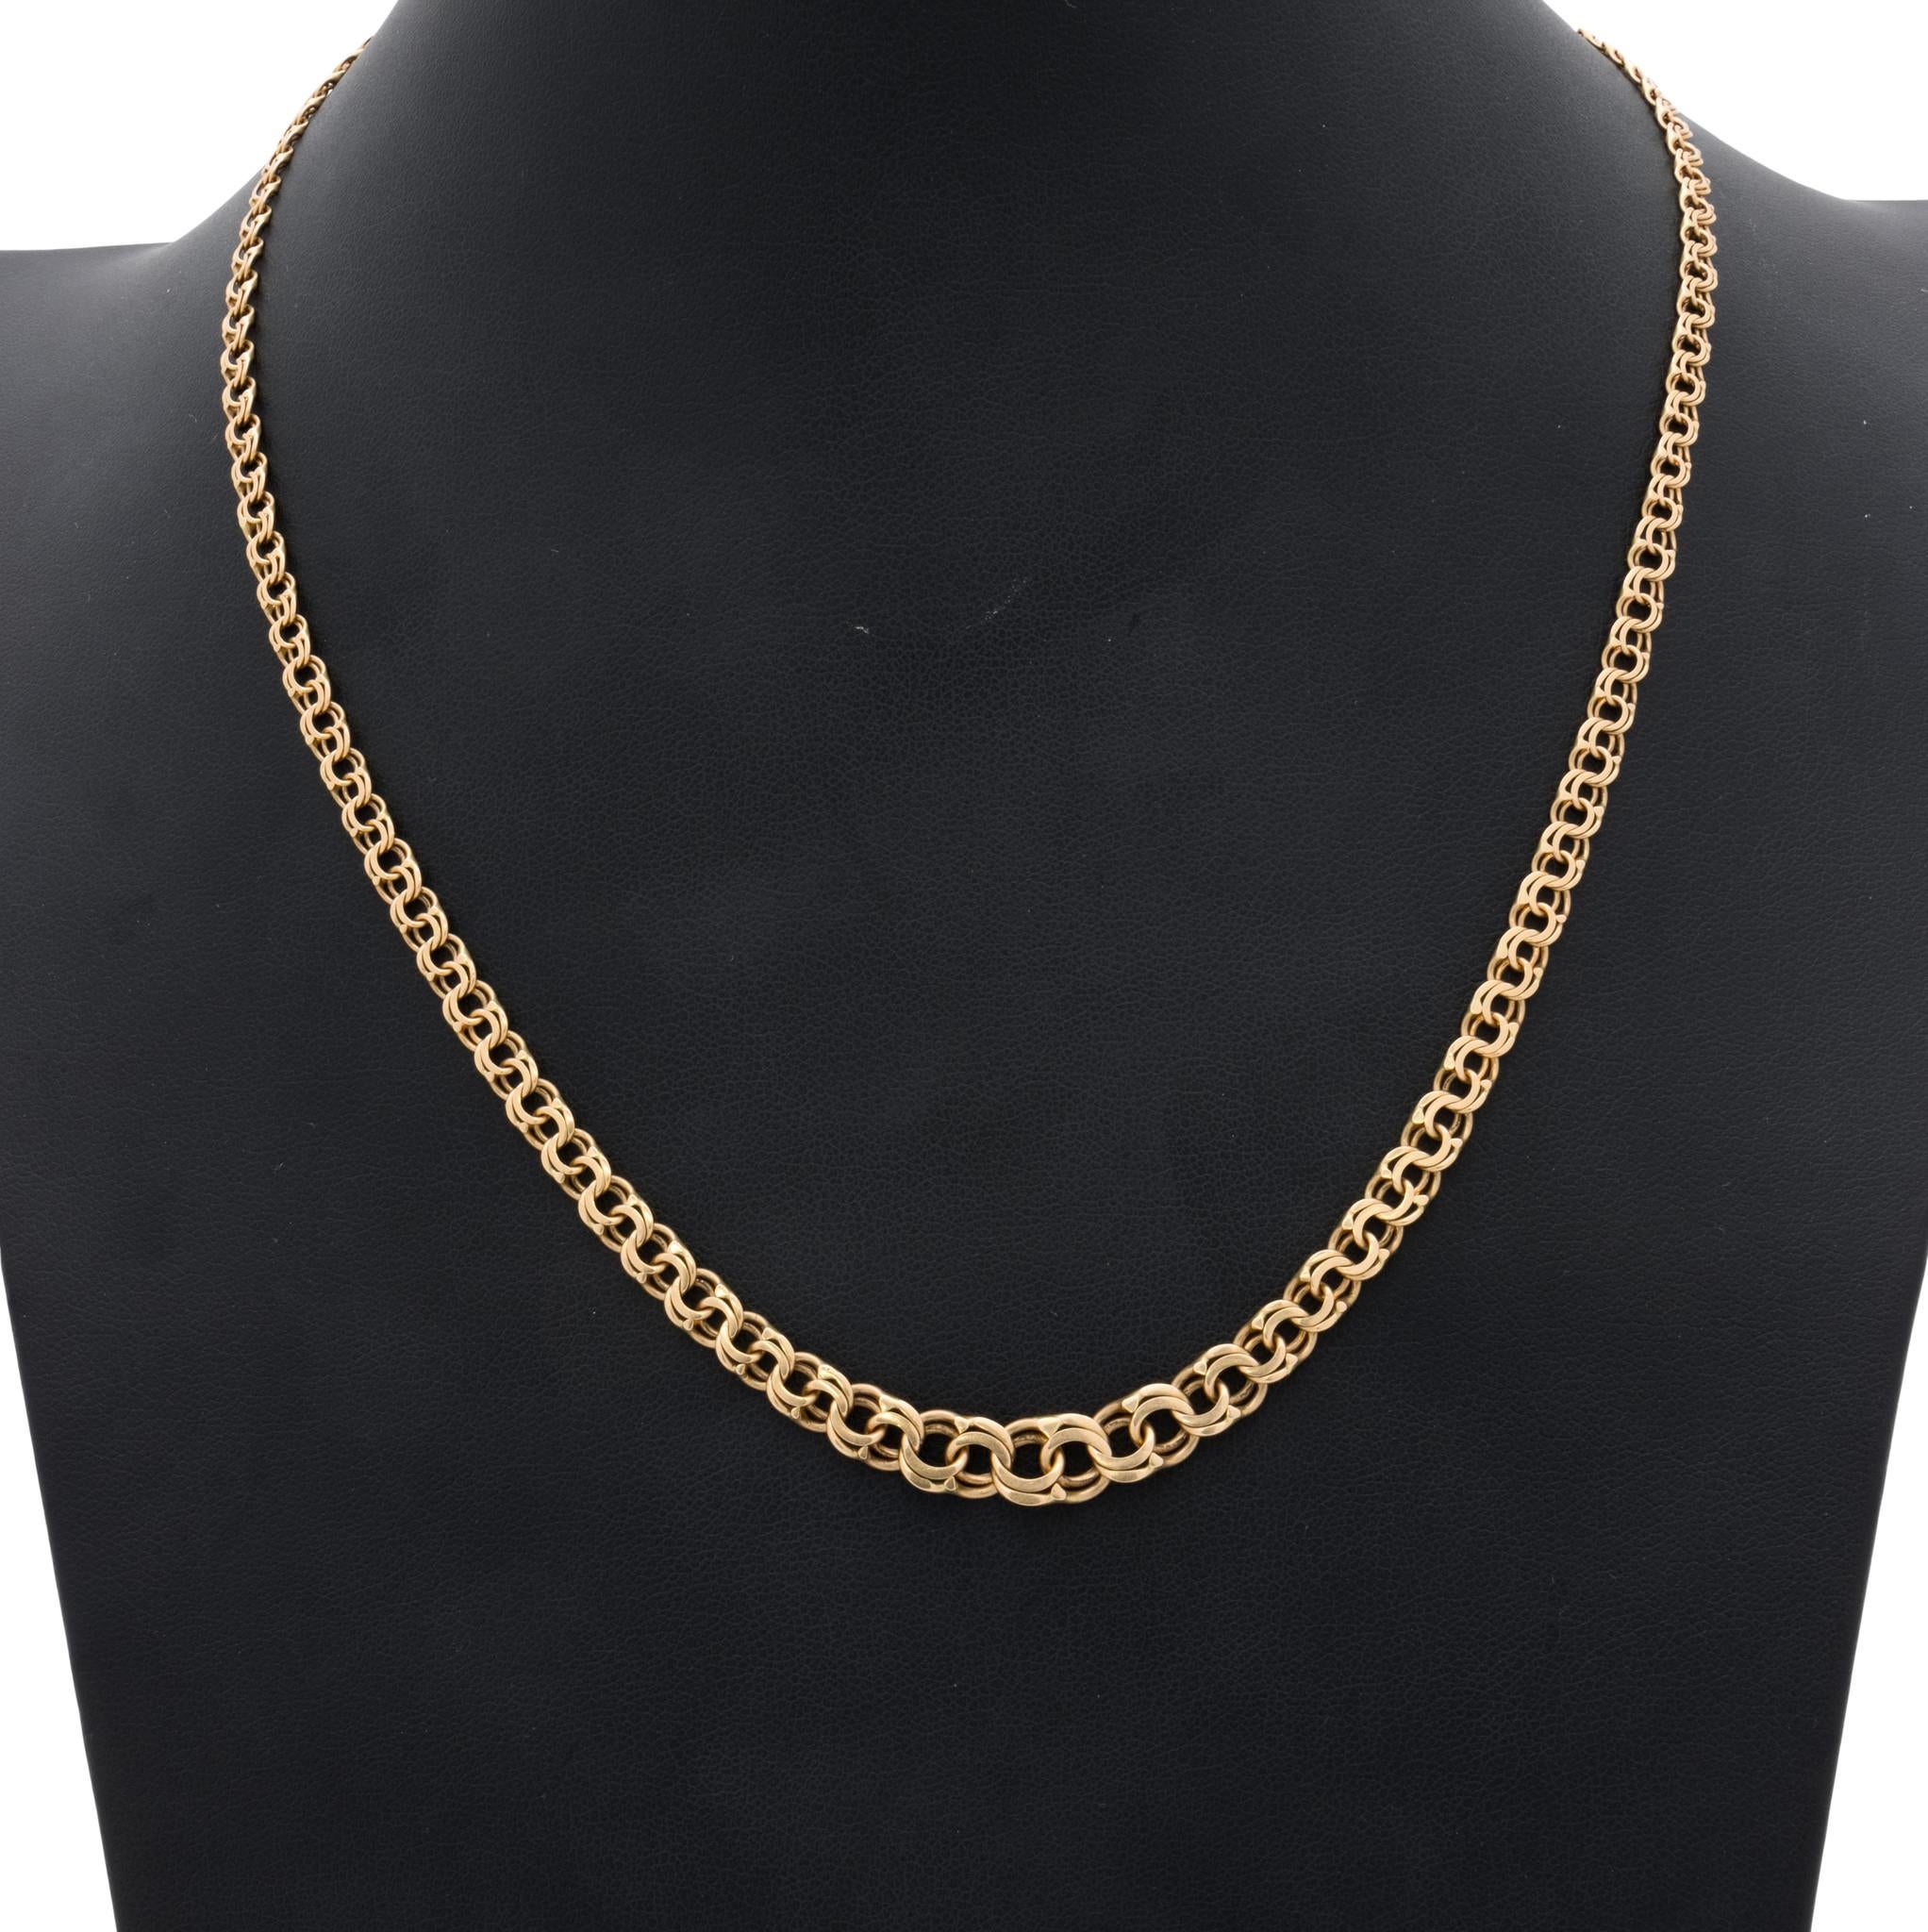 Bismarck Spanish gold link looped chain. Loops are graduated from small links at top to larger links in center. Could be worn alone or with a pendant. Marked 